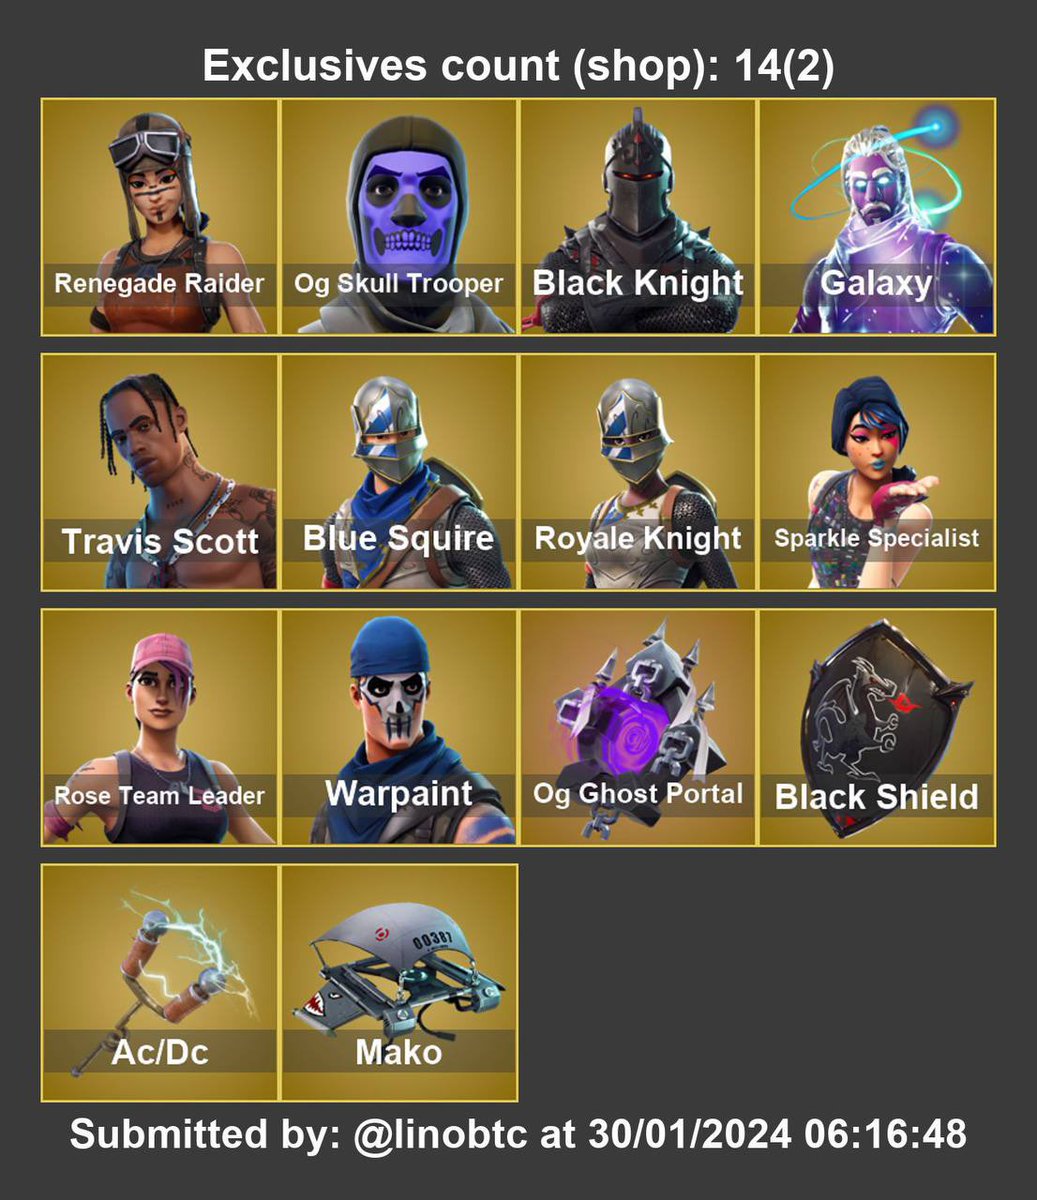 100+ Renegade Raider + Og Skull + Black Knight + Galaxy + Travis Scott + 8800VB - Non full access on gmail Gmail is fucked by prev Was purchased from ogo by mal Psn info , Xbox info Clean & safe to main Recent activity by prev - Co: $700 Bin: $OFFER